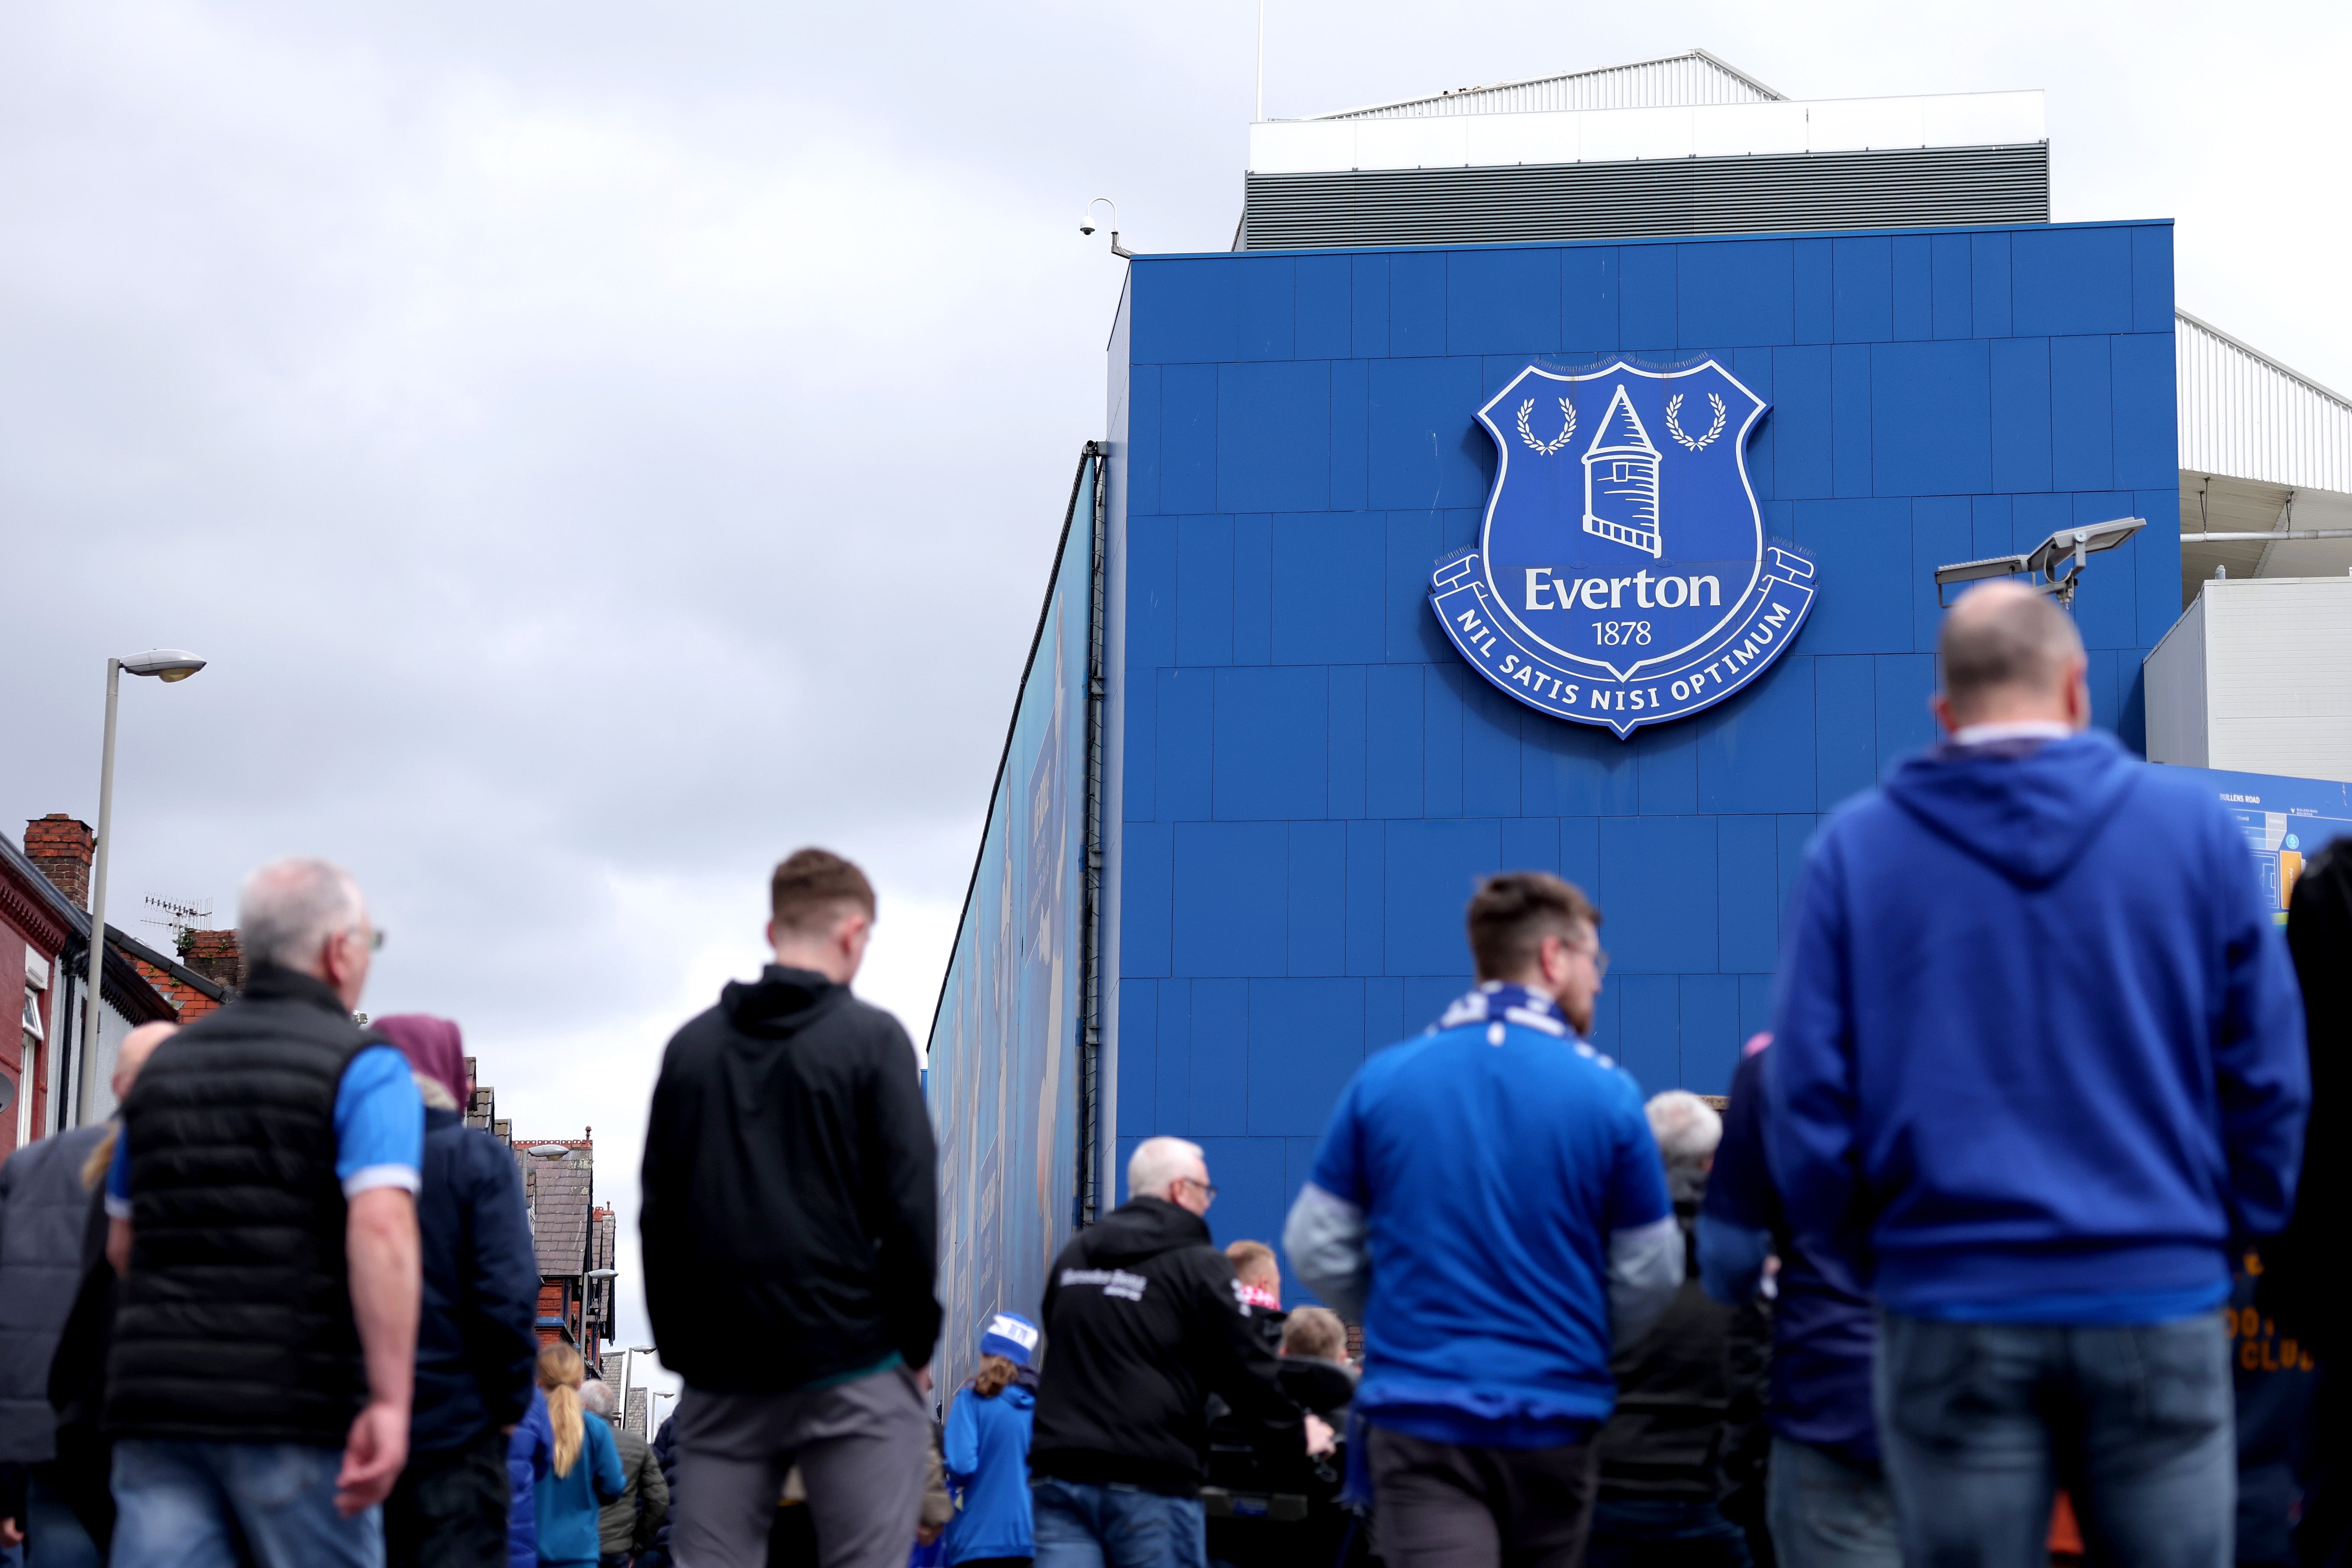 Everton are facing the risk of administration